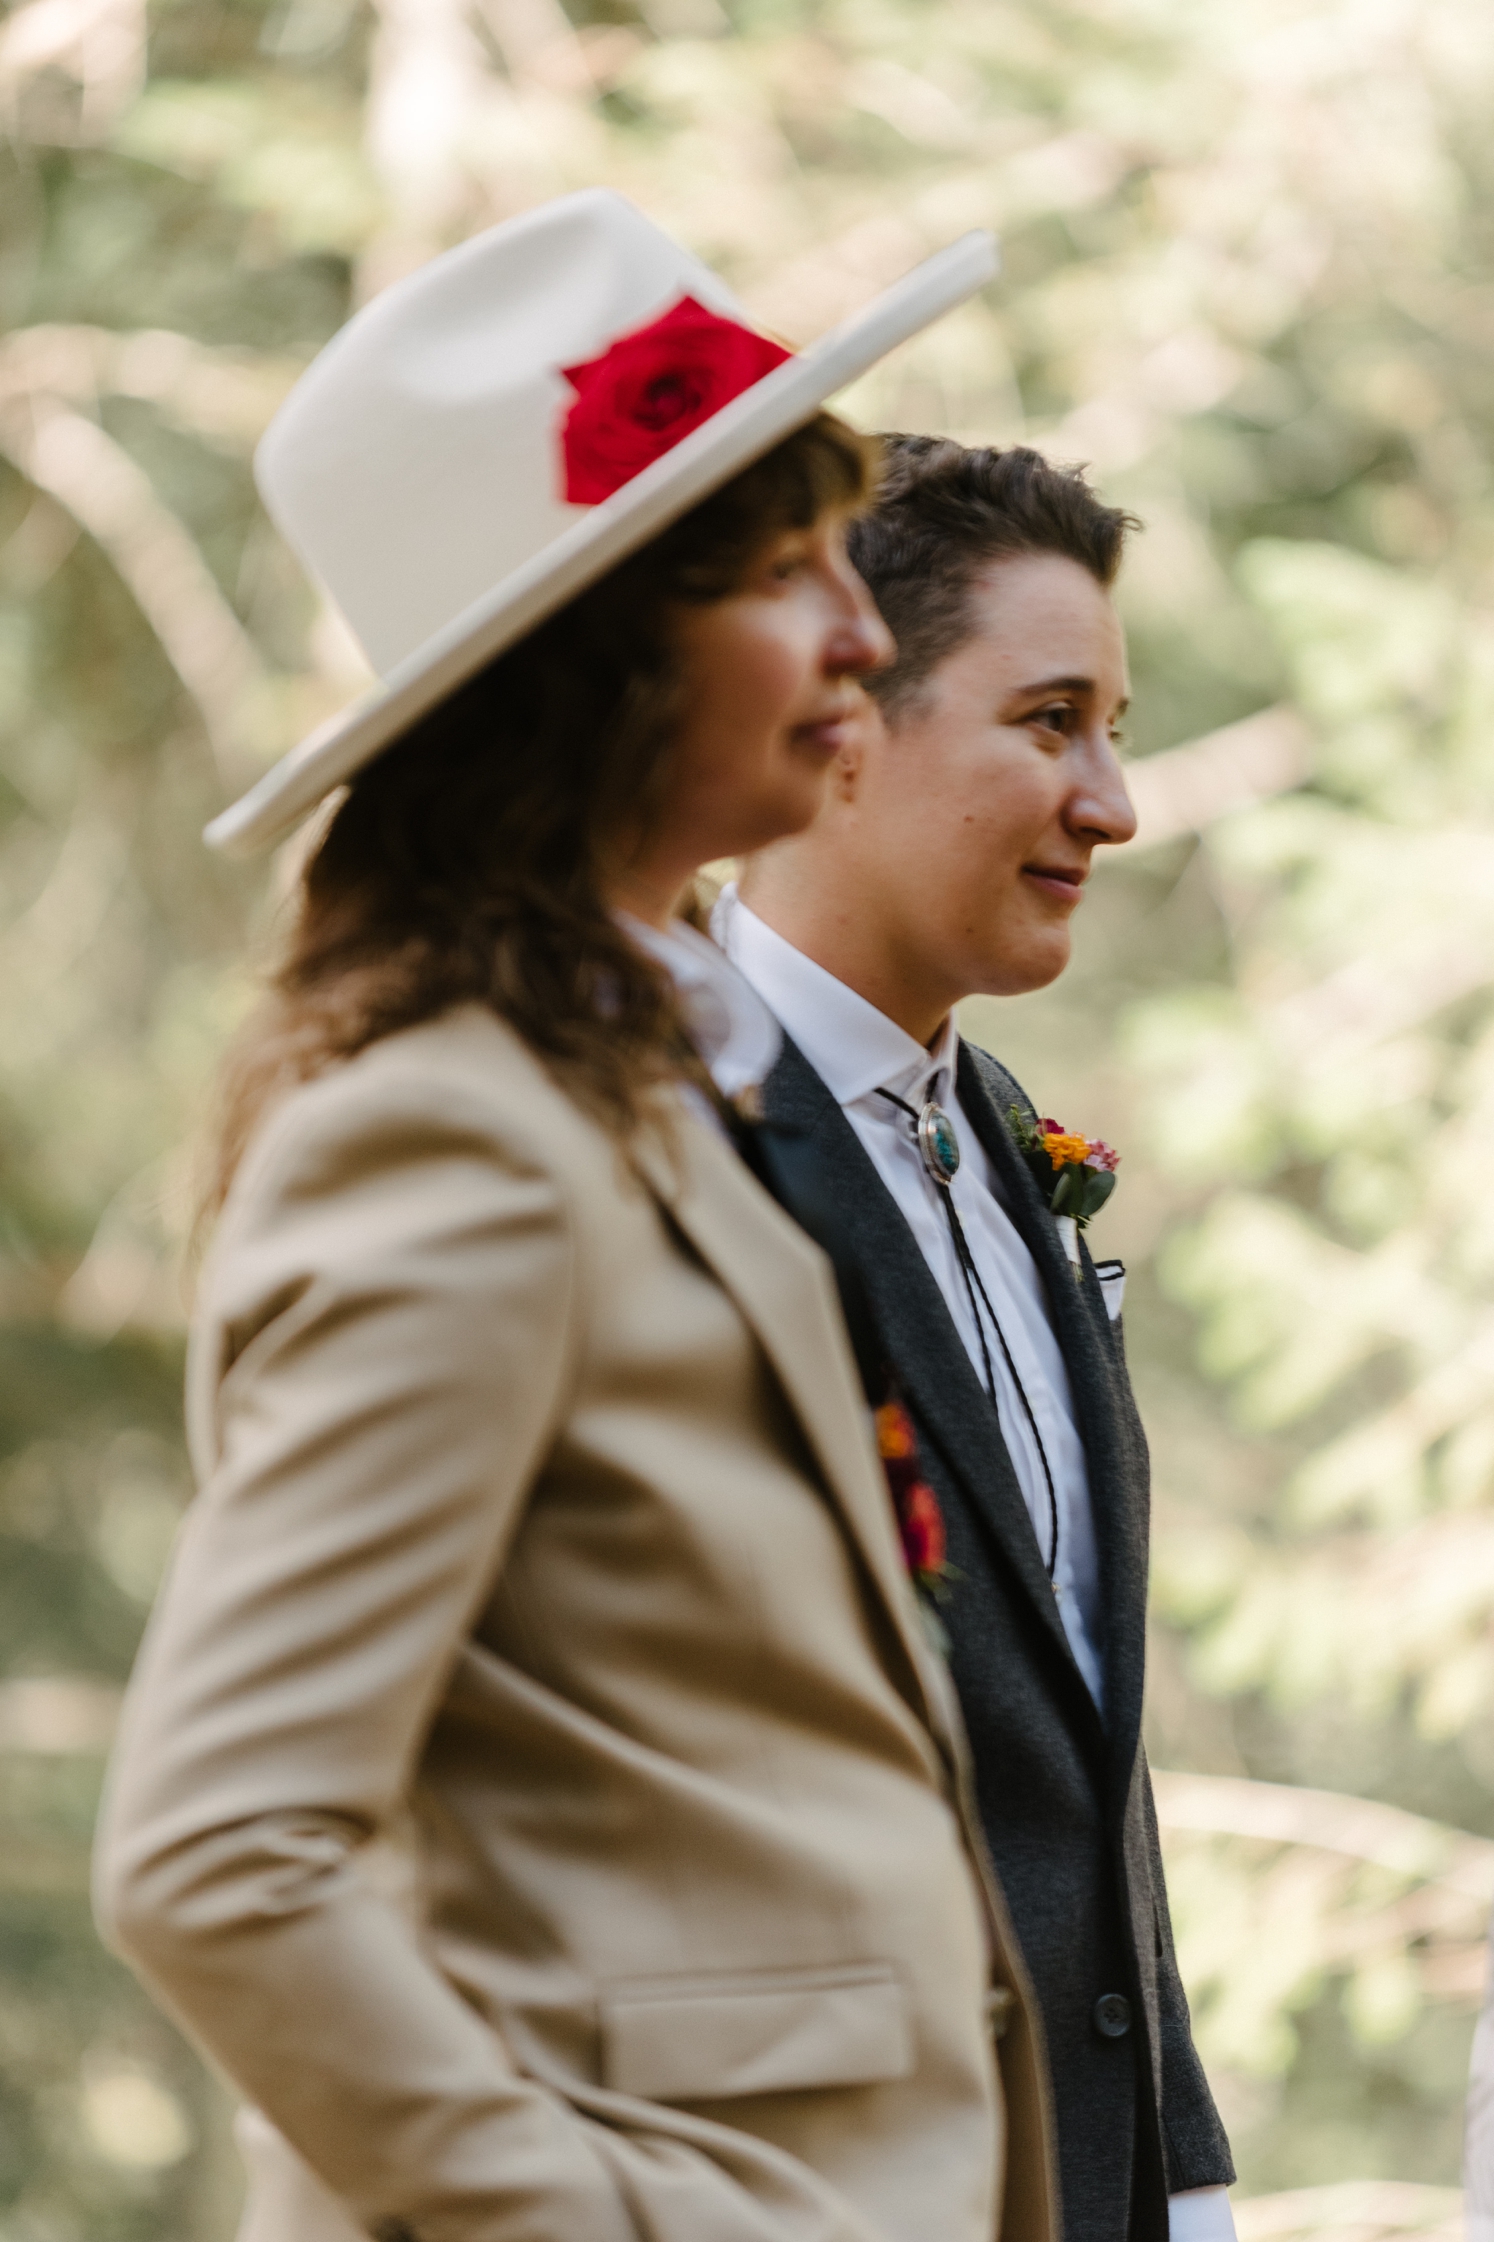 Couple looking at guests during LGBTQ wedding | McArthur Weddings and Events